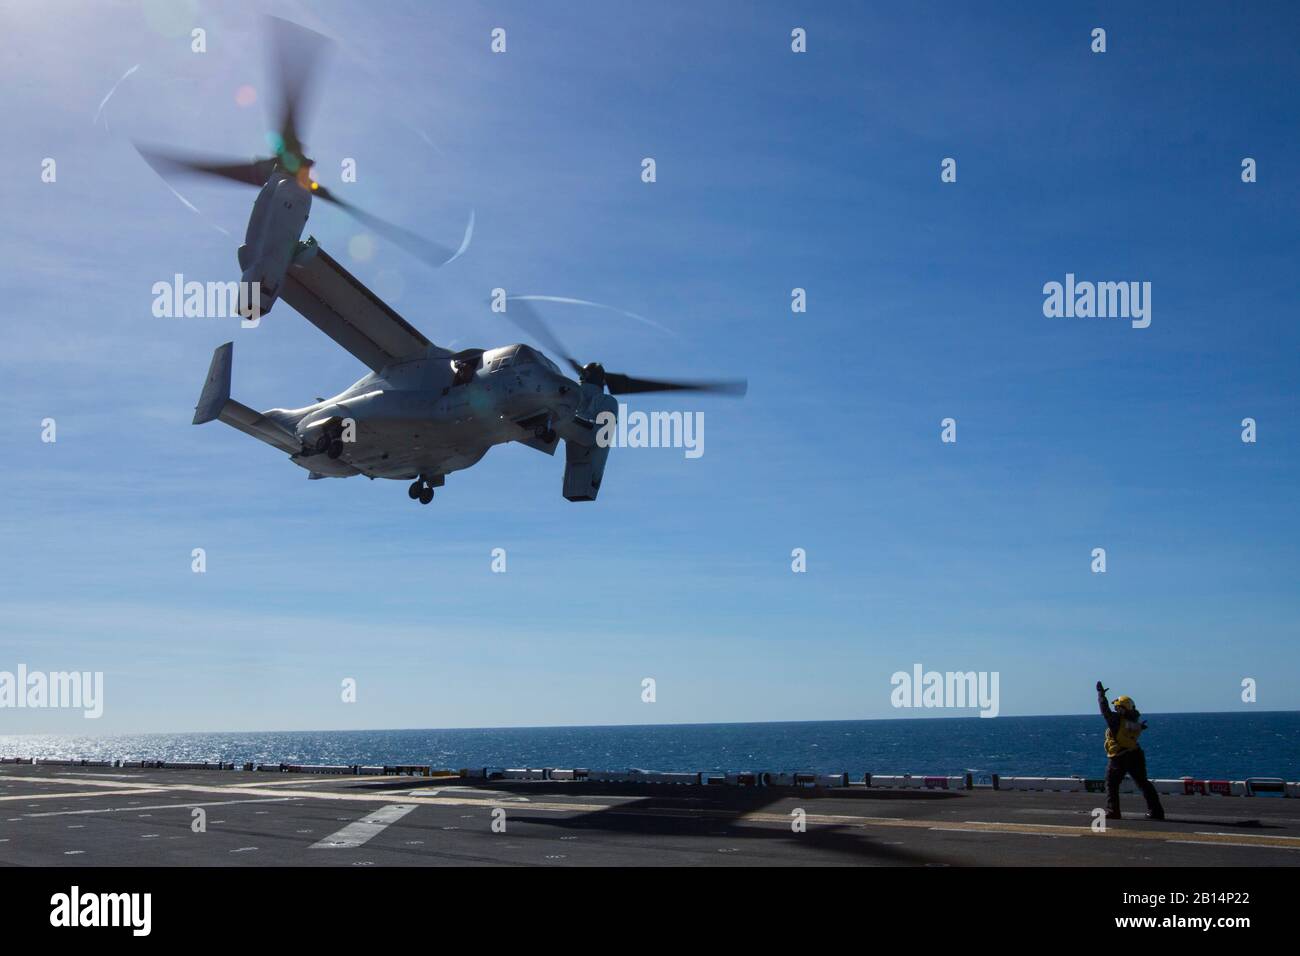 A U.S. Navy sailor with the amphibious assault ship USS Wasp (LHD 1) guides an MV-22B Osprey tiltrotor aircraft with Marine Medium Tiltrotor Squadron 265 (Reinforced), 31st Marine Expeditionary Unit, to land during flight operations aboard the Wasp in the Coral Sea, July 15, 2019. Wasp, flagship of the Wasp Amphibious Ready Group, with embarked 31st MEU, is currently participating in Talisman Sabre 2019 off the coast of Northern Australia. A bilateral, biennial event, Talisman Sabre is designed to improve U.S. and Australian combat training, readiness and interoperability through realistic, re Stock Photo